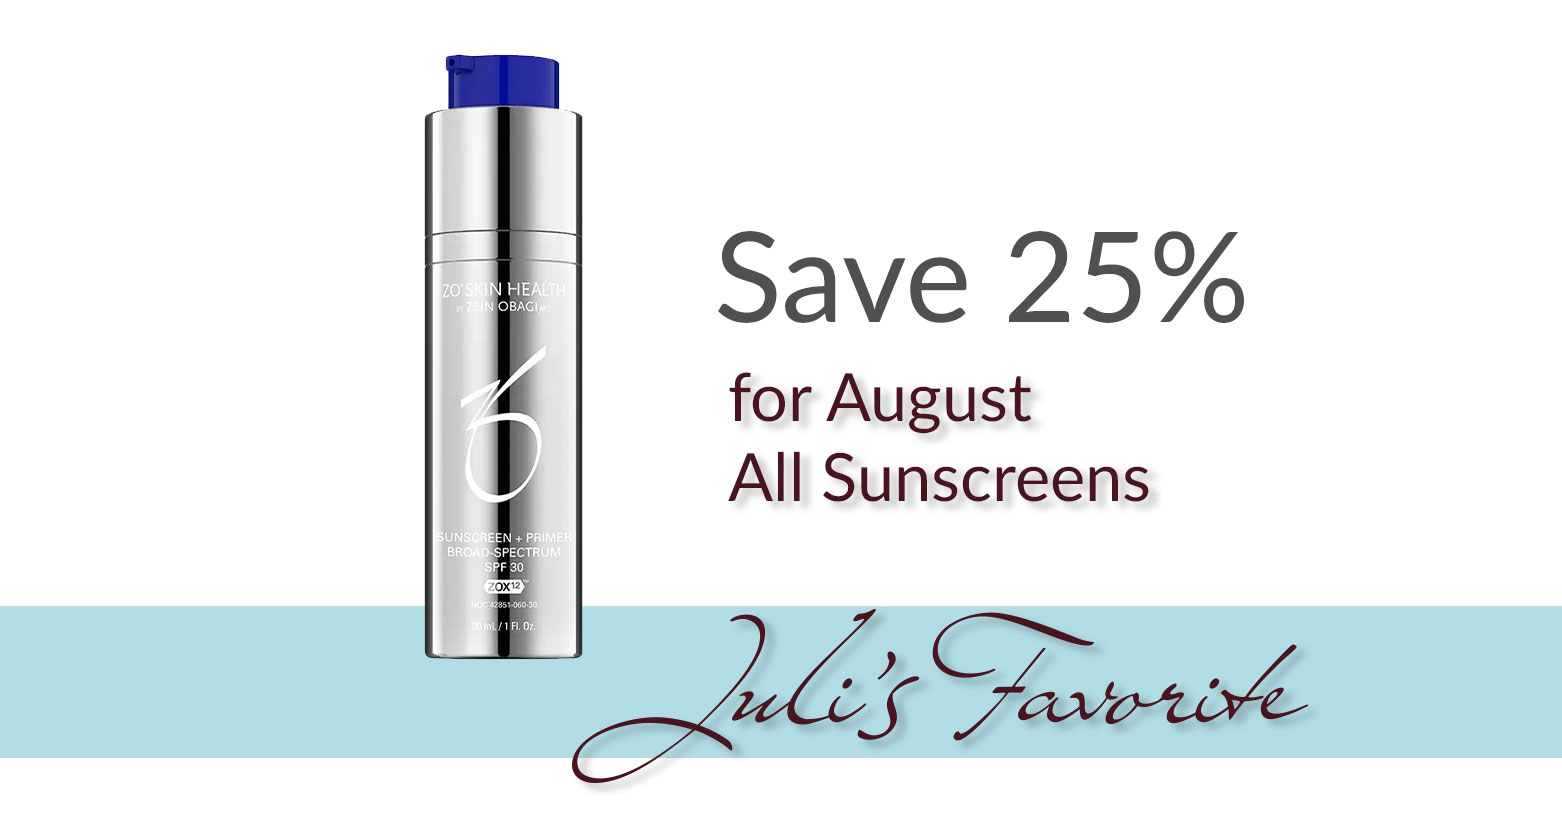 Save 25% for August on all Sunscreens